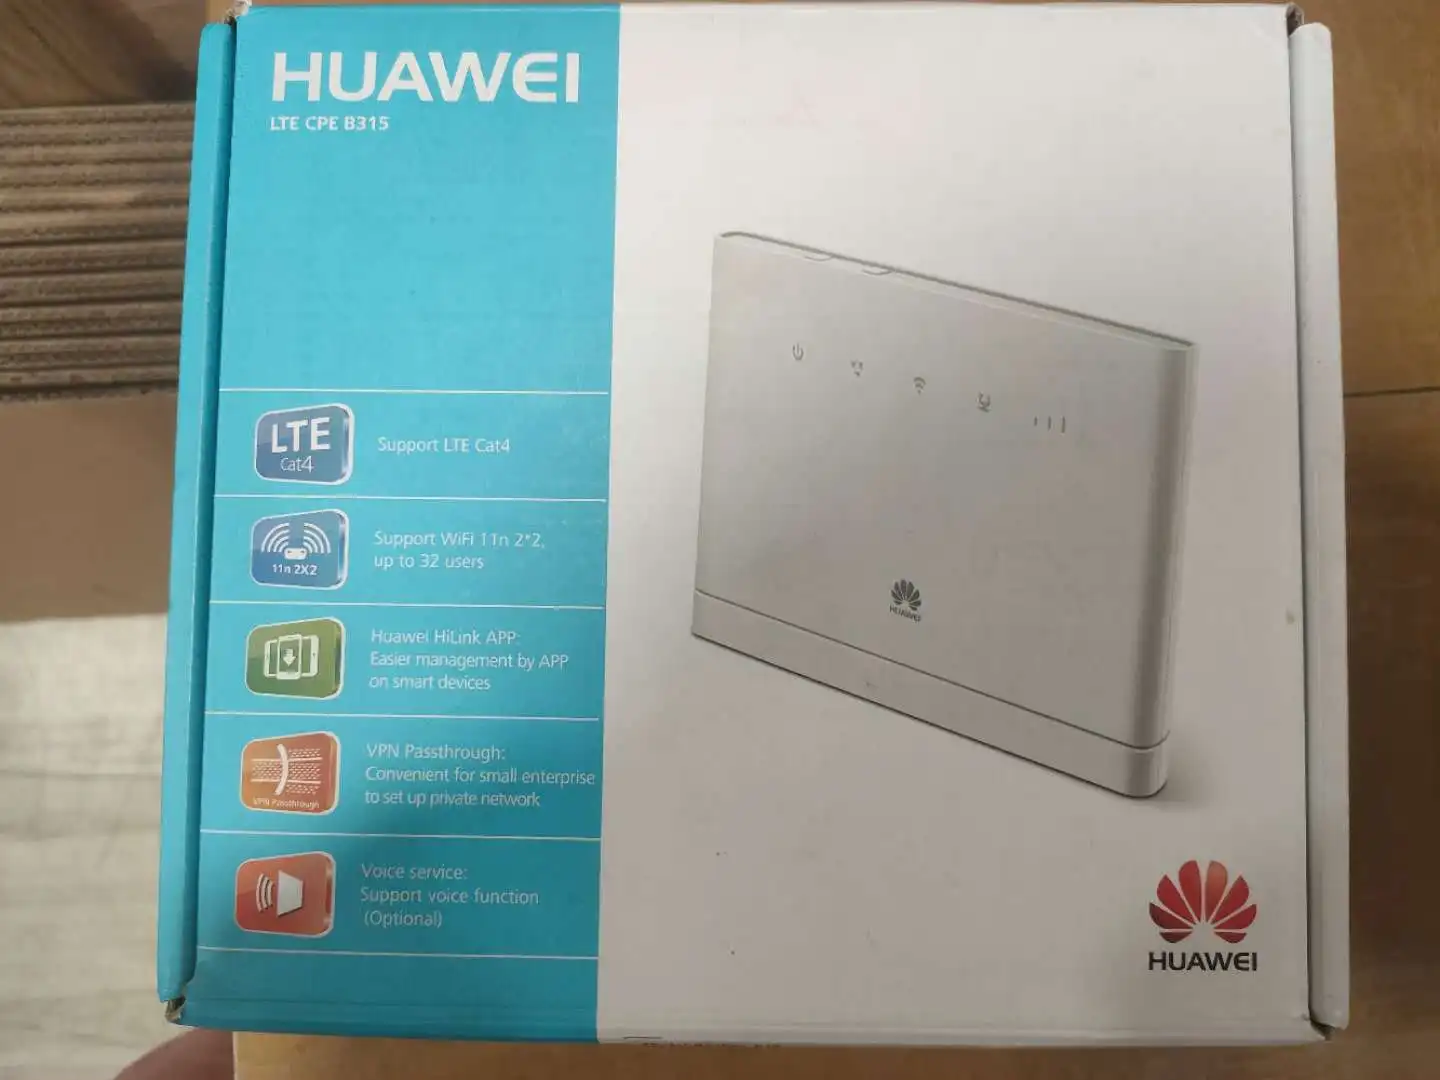 Setup Lte Router Huawei B315 / Cell C Lte Manual Apn Configuration - You may use the default ssid and key found underneath the modem by skipping this step and clicking nish or you can change the key as indicated in the next section.